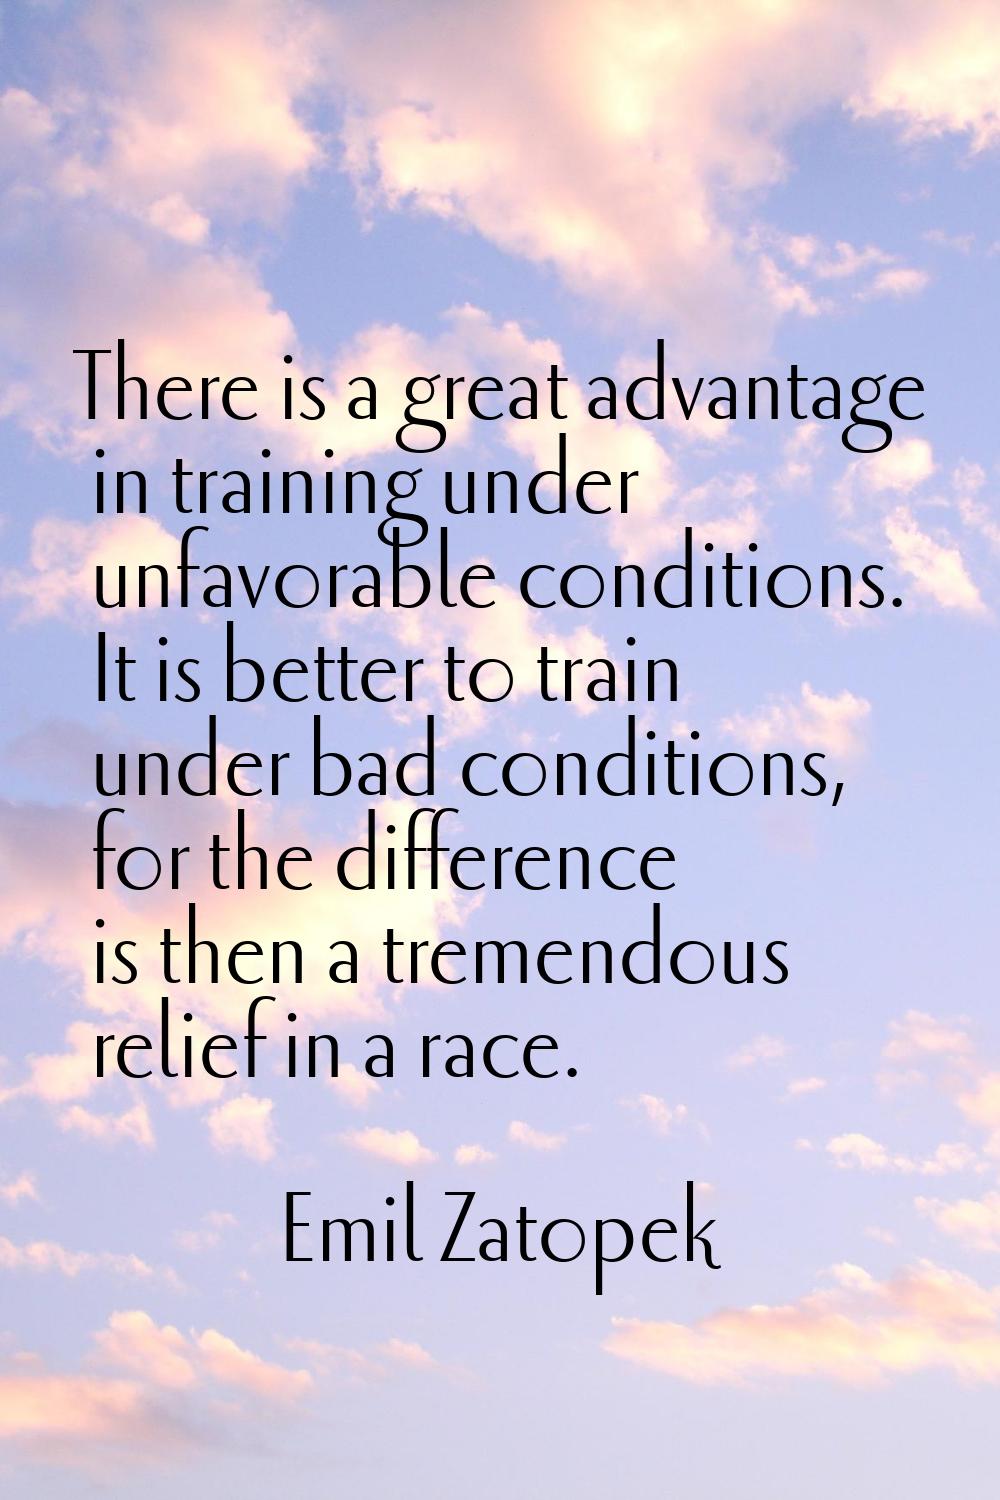 There is a great advantage in training under unfavorable conditions. It is better to train under ba